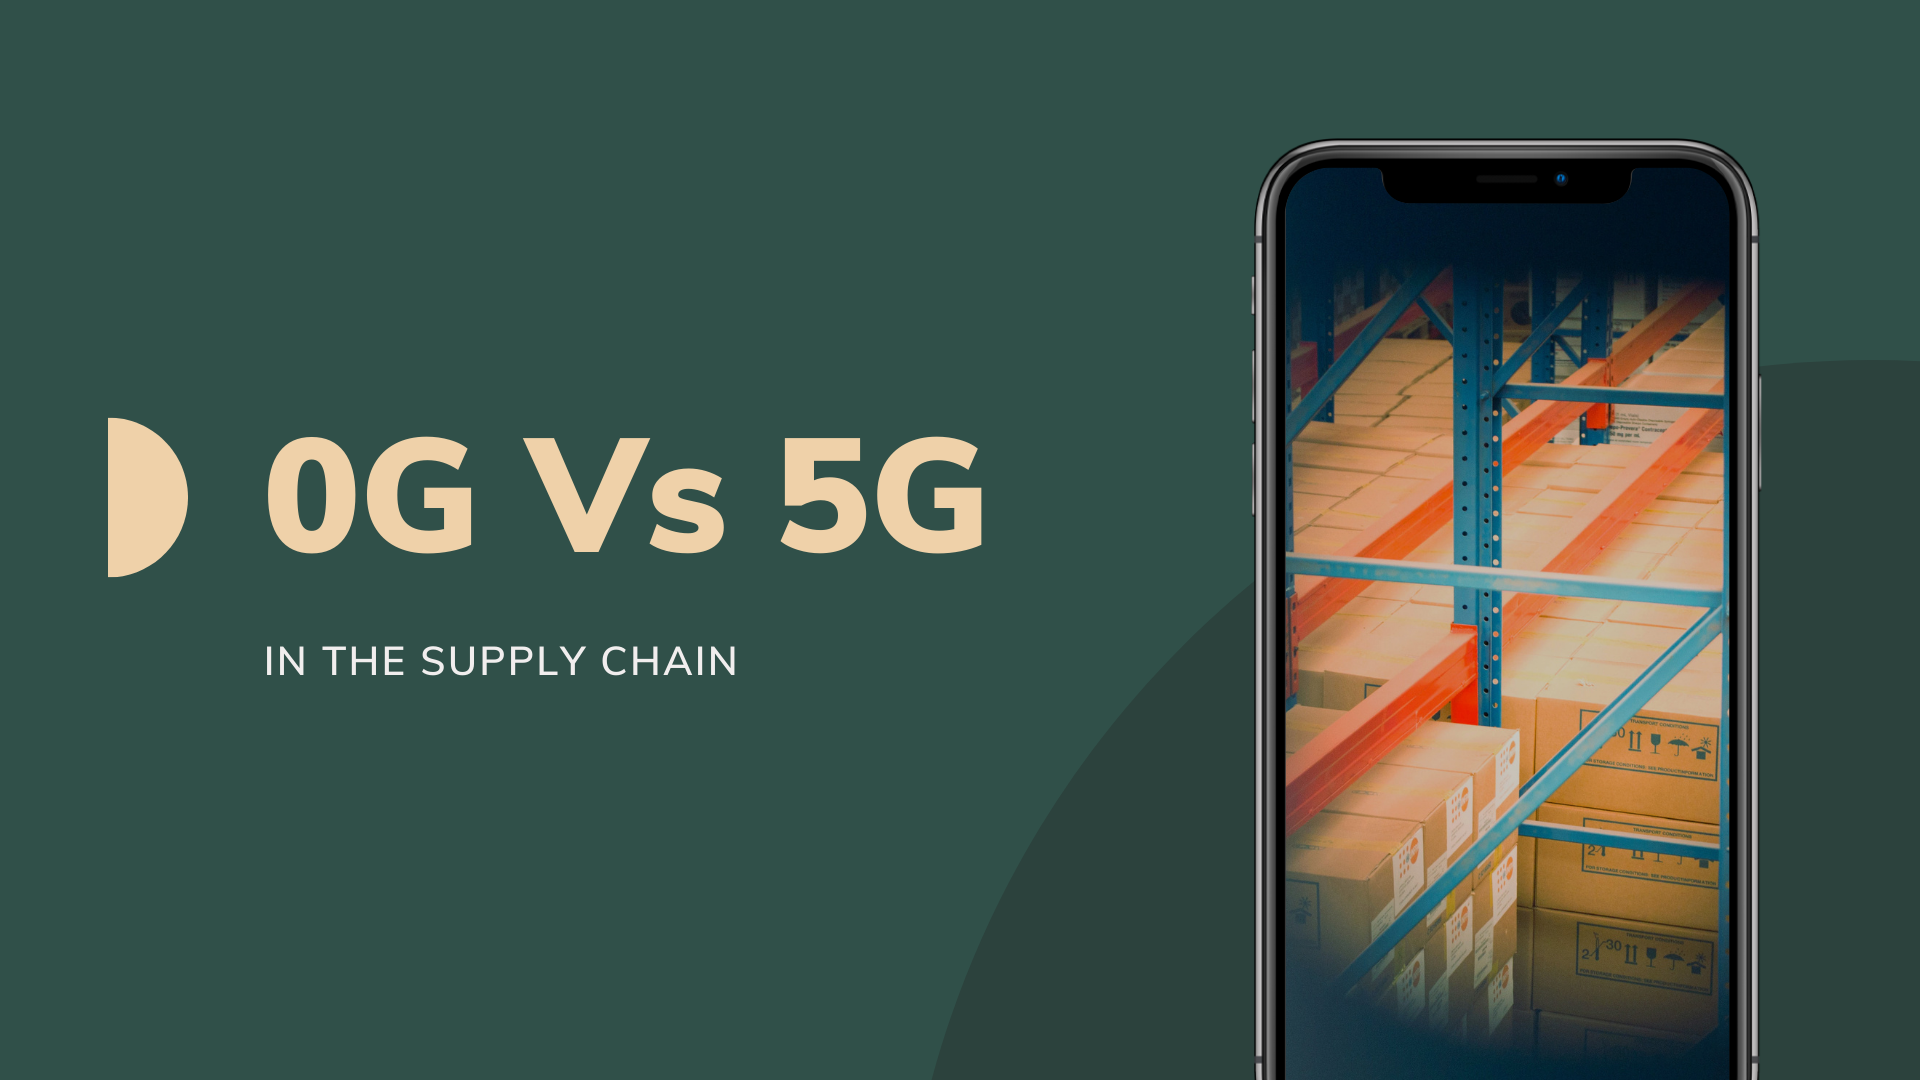 0G Vs 5G In The Supply Chain